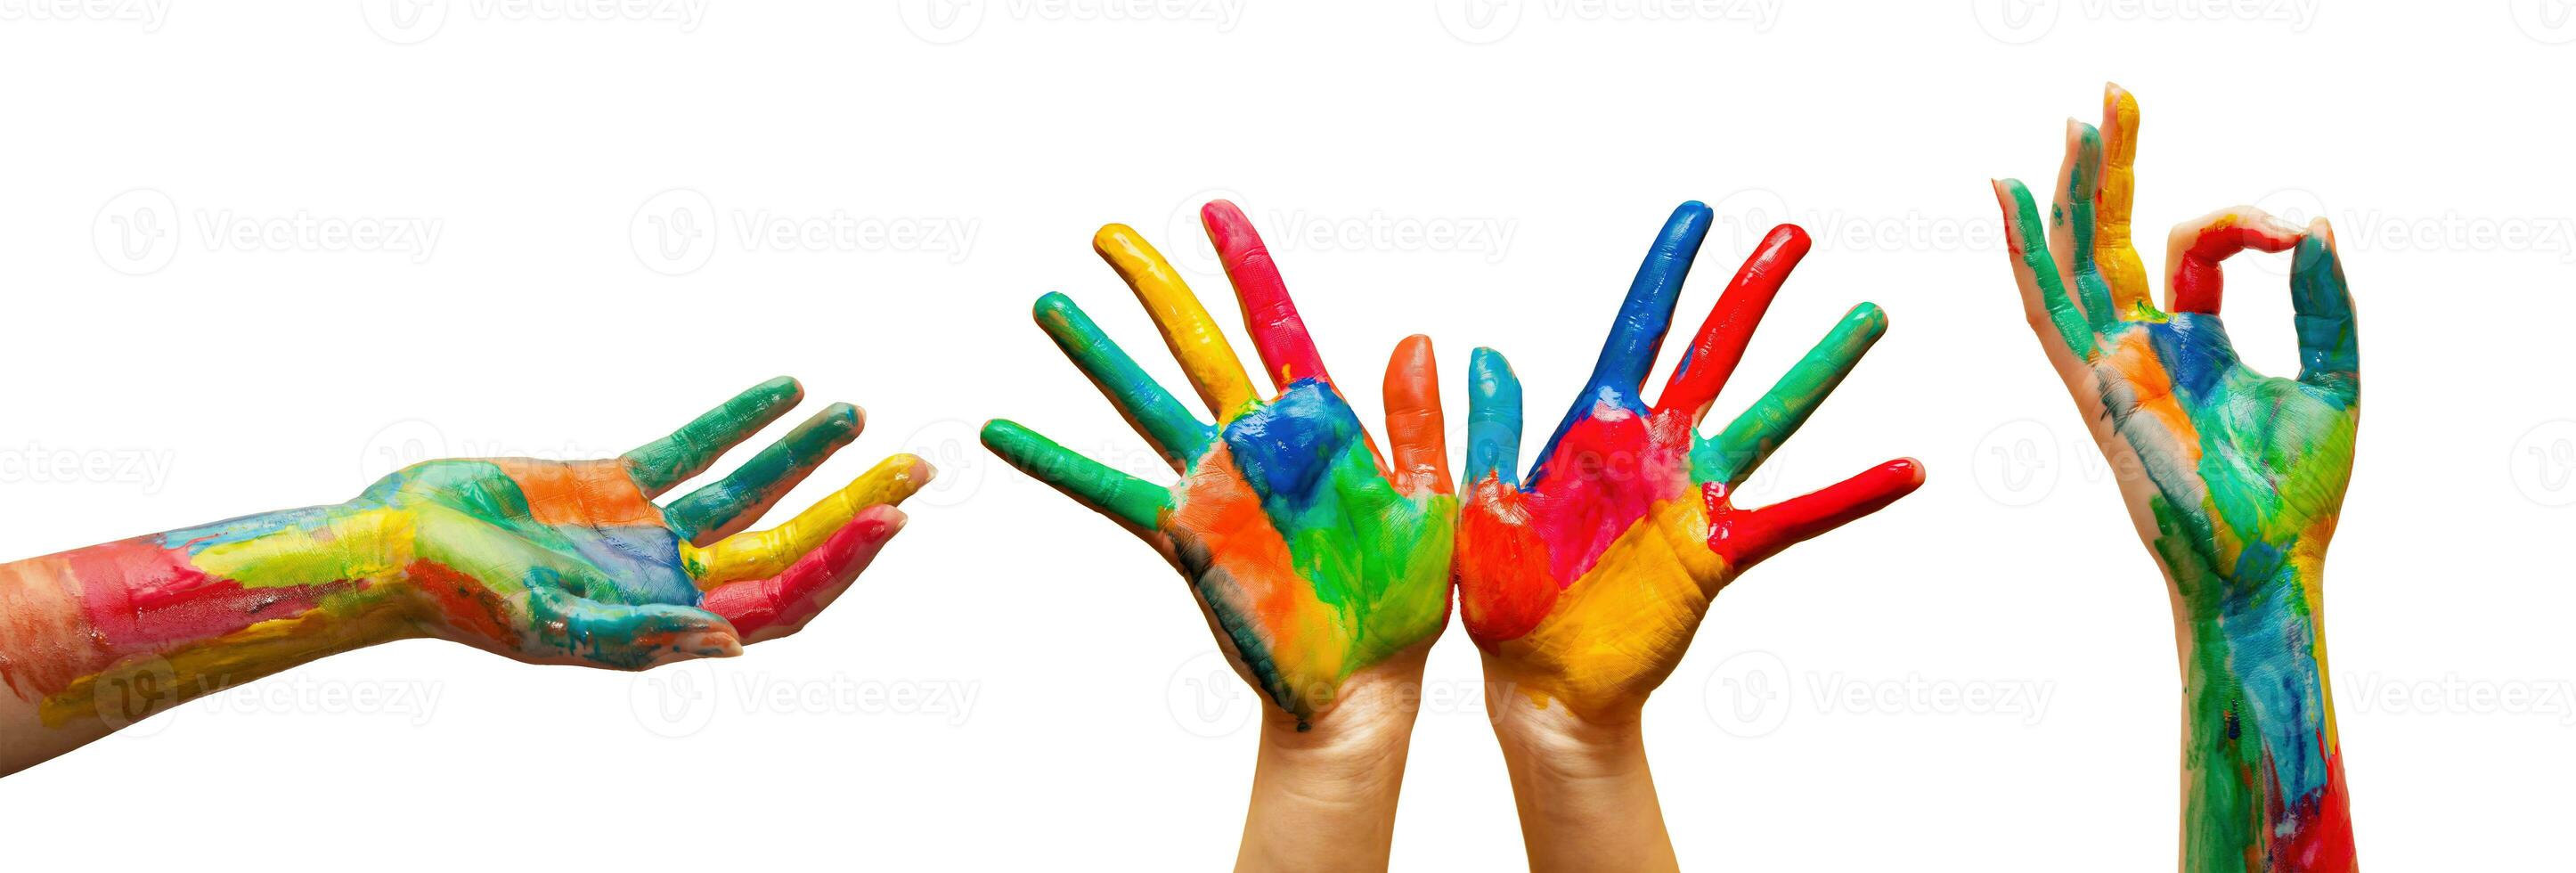 Hands painted in colorful paint in gestures collection, set on white background photo